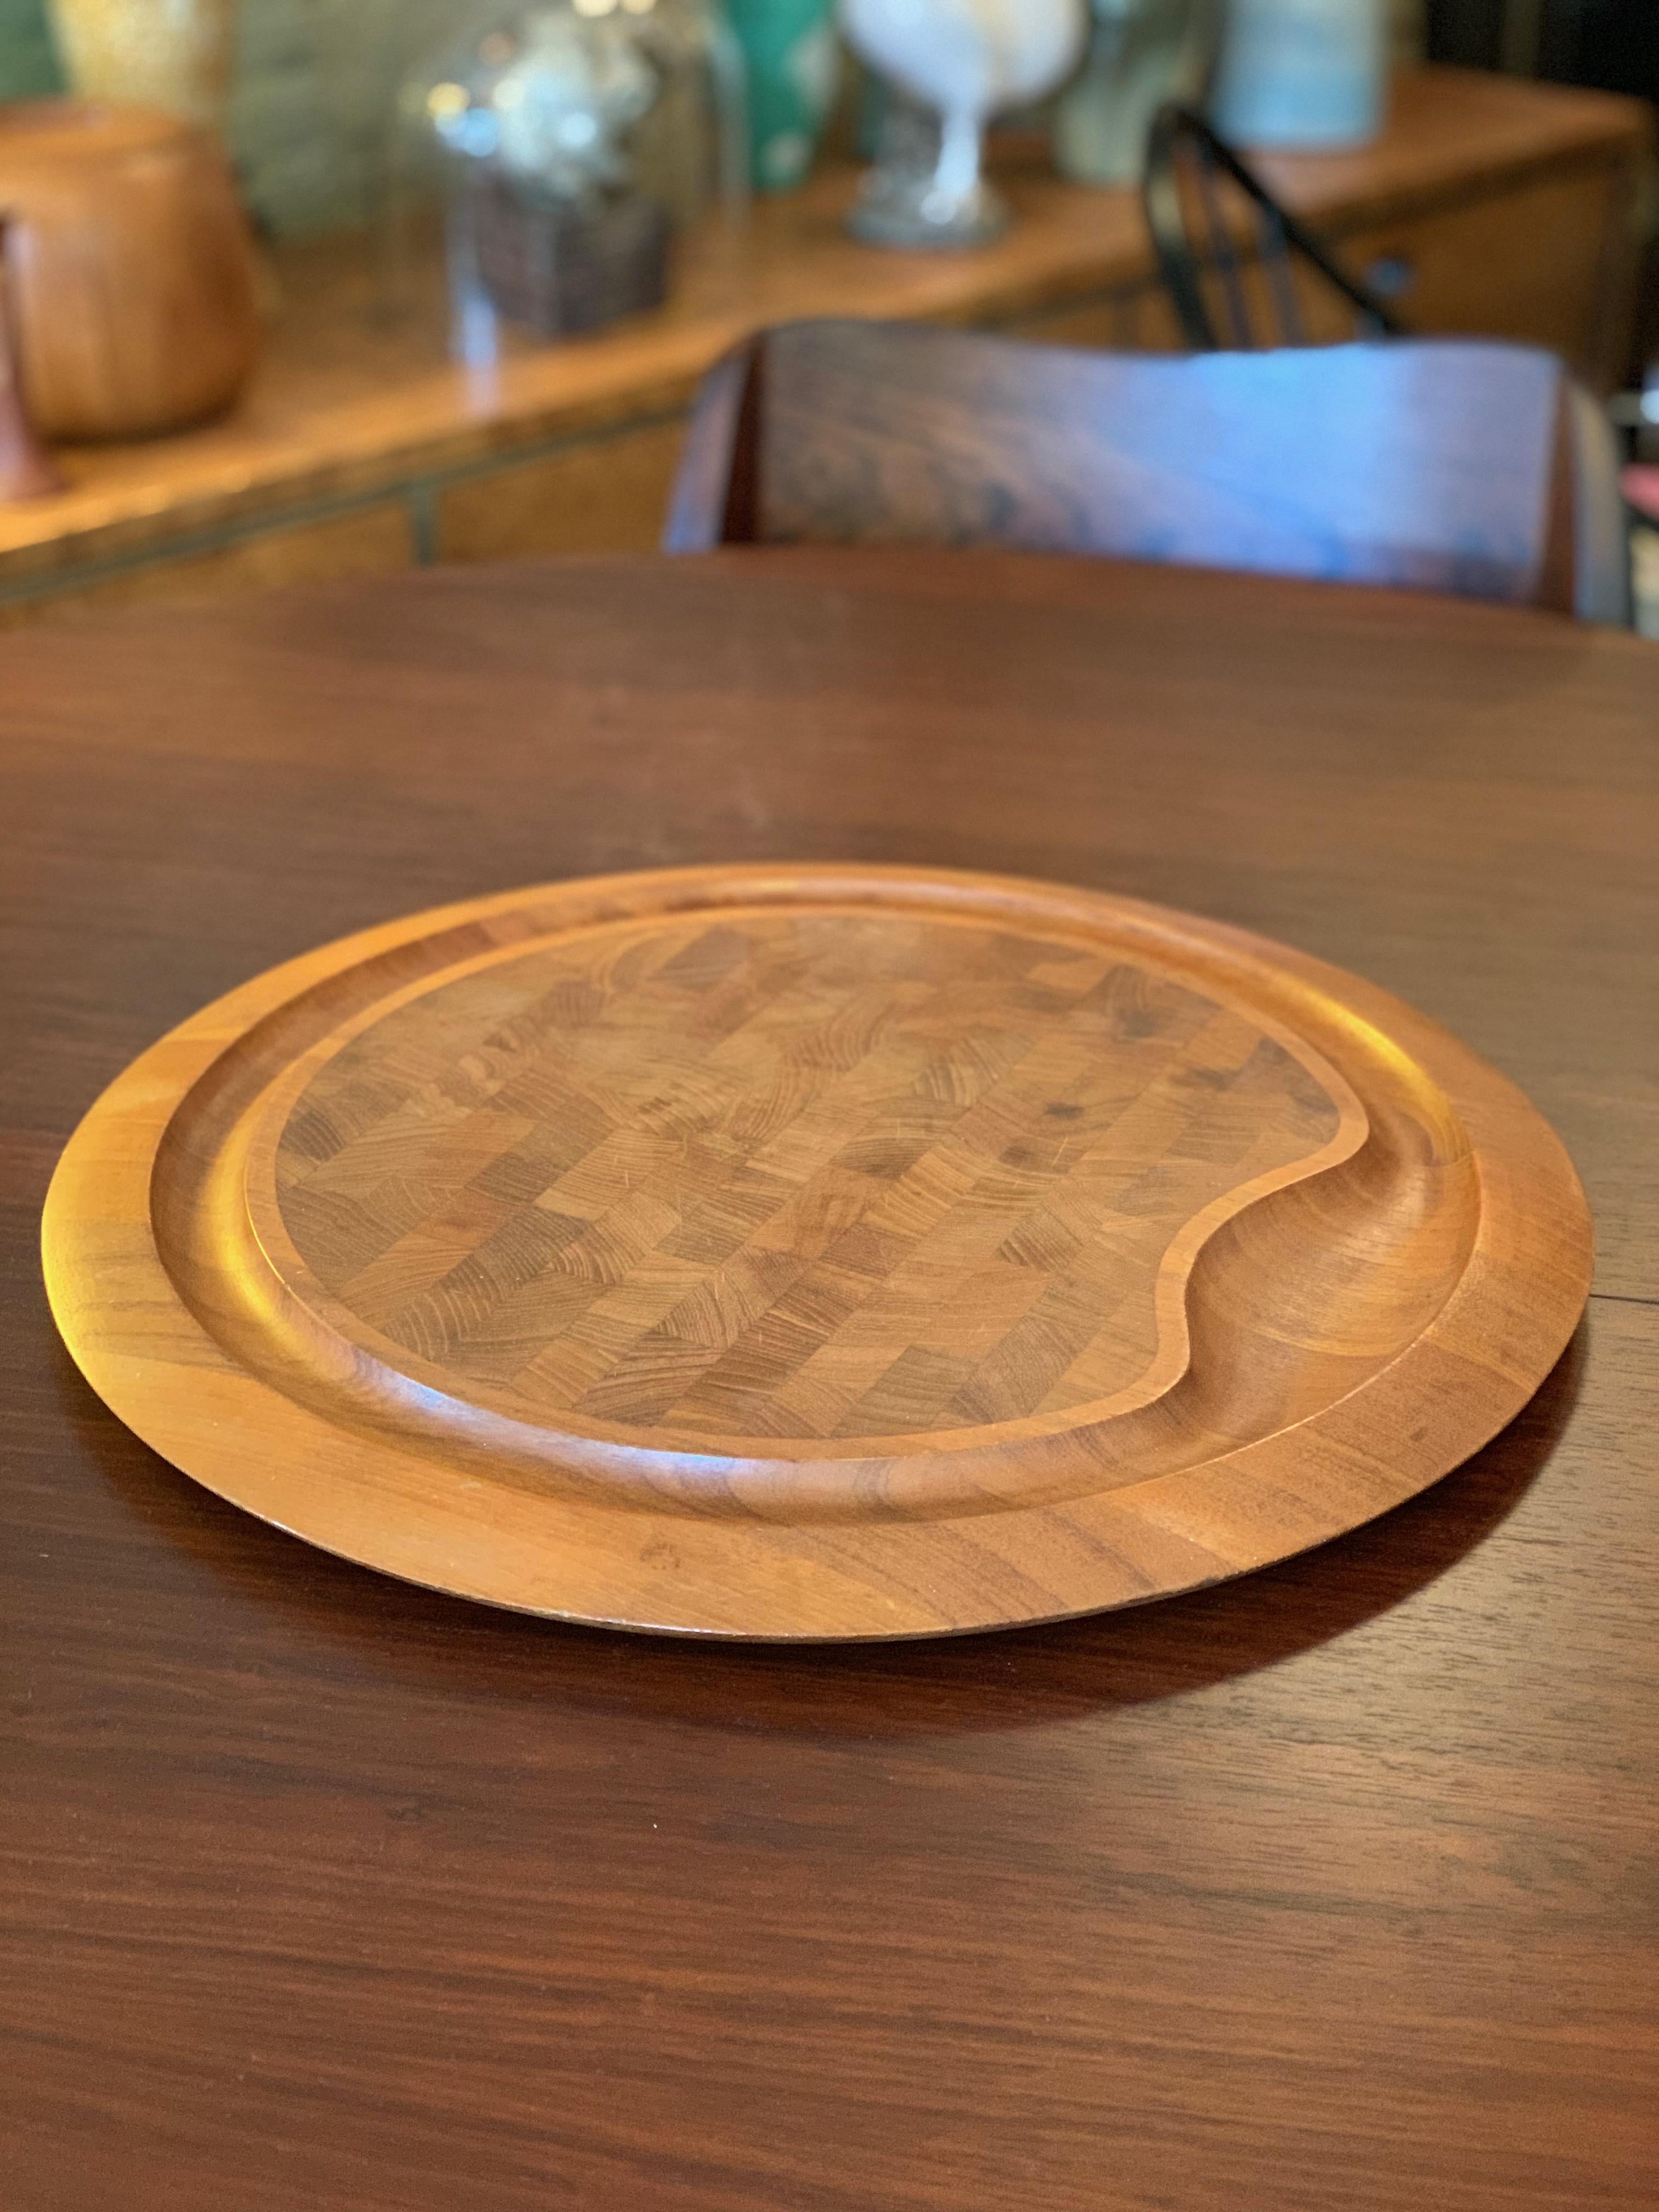 Danish Modern Teak Cutting Board Serving Tray by Jens Quistgaard For Dansk In Good Condition In Brooklyn, NY